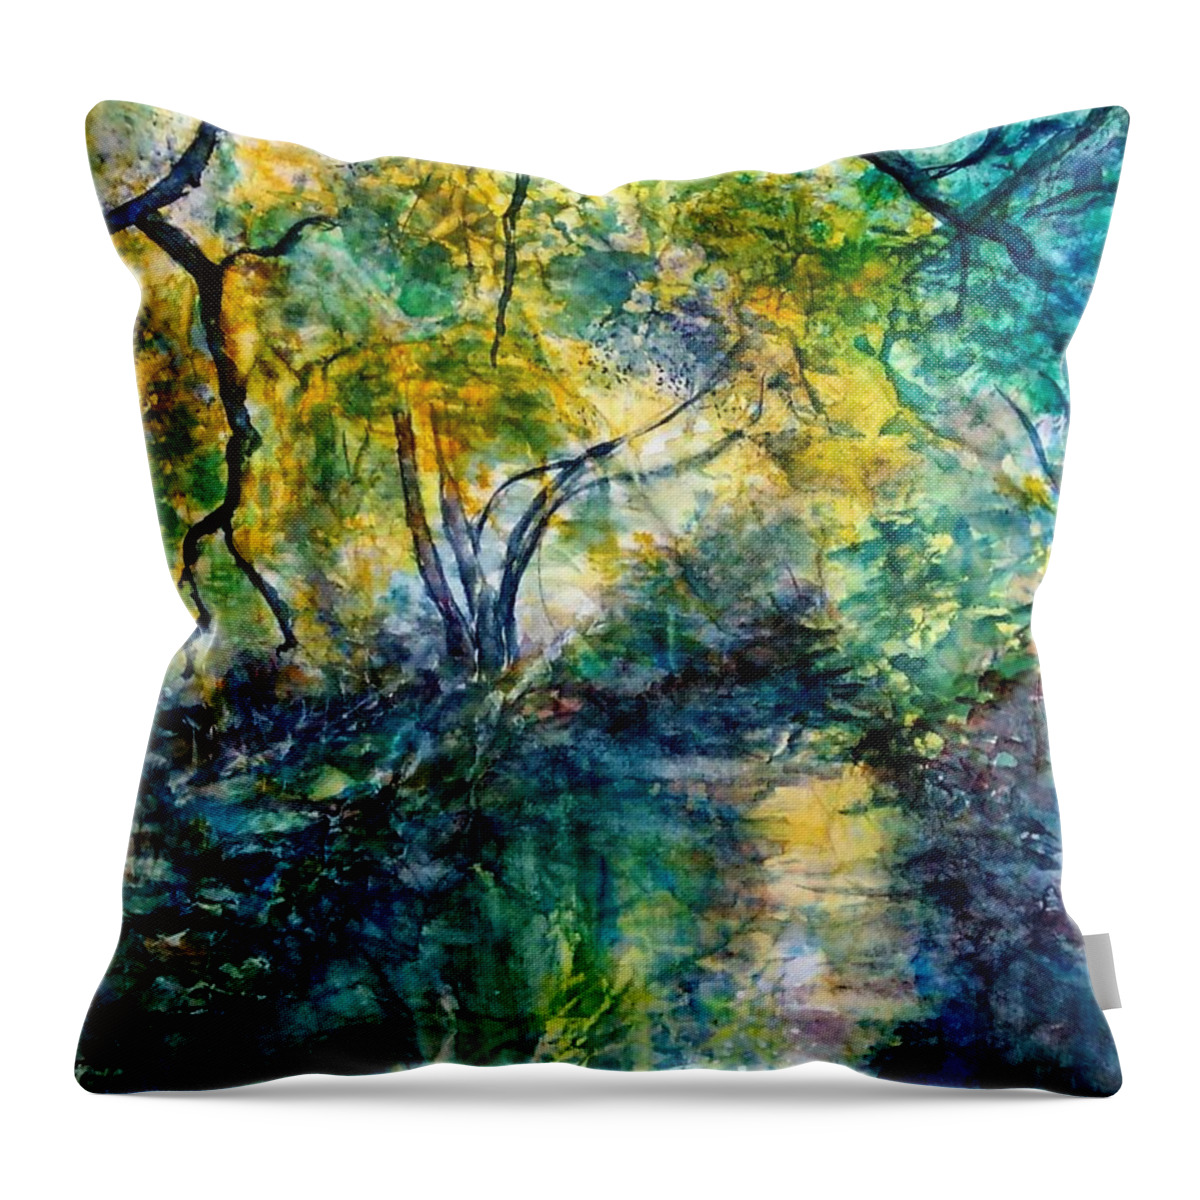 Water Scene Throw Pillow featuring the painting Tranquility by Norma Boeckler